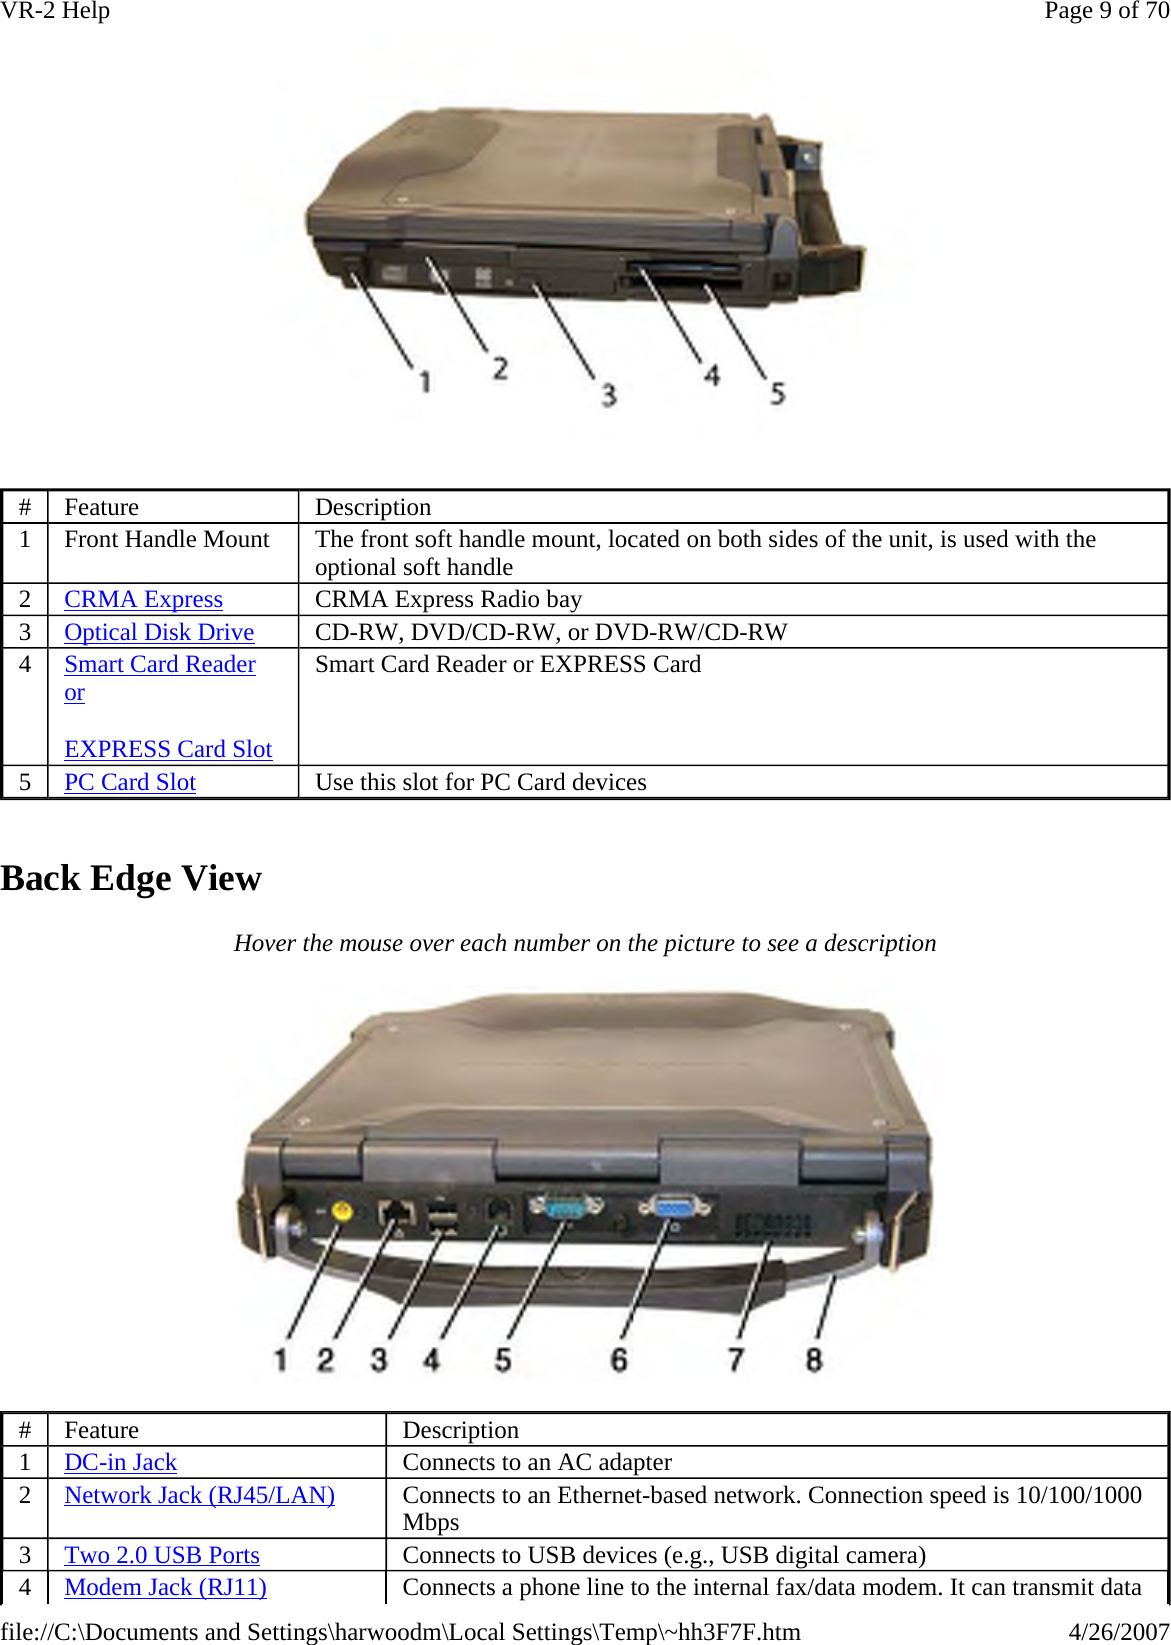    Back Edge View Hover the mouse over each number on the picture to see a description  #  Feature  Description 1  Front Handle Mount  The front soft handle mount, located on both sides of the unit, is used with the optional soft handle 2  CRMA Express CRMA Express Radio bay 3  Optical Disk Drive CD-RW, DVD/CD-RW, or DVD-RW/CD-RW 4  Smart Card Reader or  EXPRESS Card Slot Smart Card Reader or EXPRESS Card 5  PC Card Slot Use this slot for PC Card devices #  Feature  Description 1  DC-in Jack Connects to an AC adapter 2  Network Jack (RJ45/LAN) Connects to an Ethernet-based network. Connection speed is 10/100/1000 Mbps 3  Two 2.0 USB Ports Connects to USB devices (e.g., USB digital camera) 4  Modem Jack (RJ11) Connects a phone line to the internal fax/data modem. It can transmit data Page 9 of 70VR-2 Help4/26/2007file://C:\Documents and Settings\harwoodm\Local Settings\Temp\~hh3F7F.htm